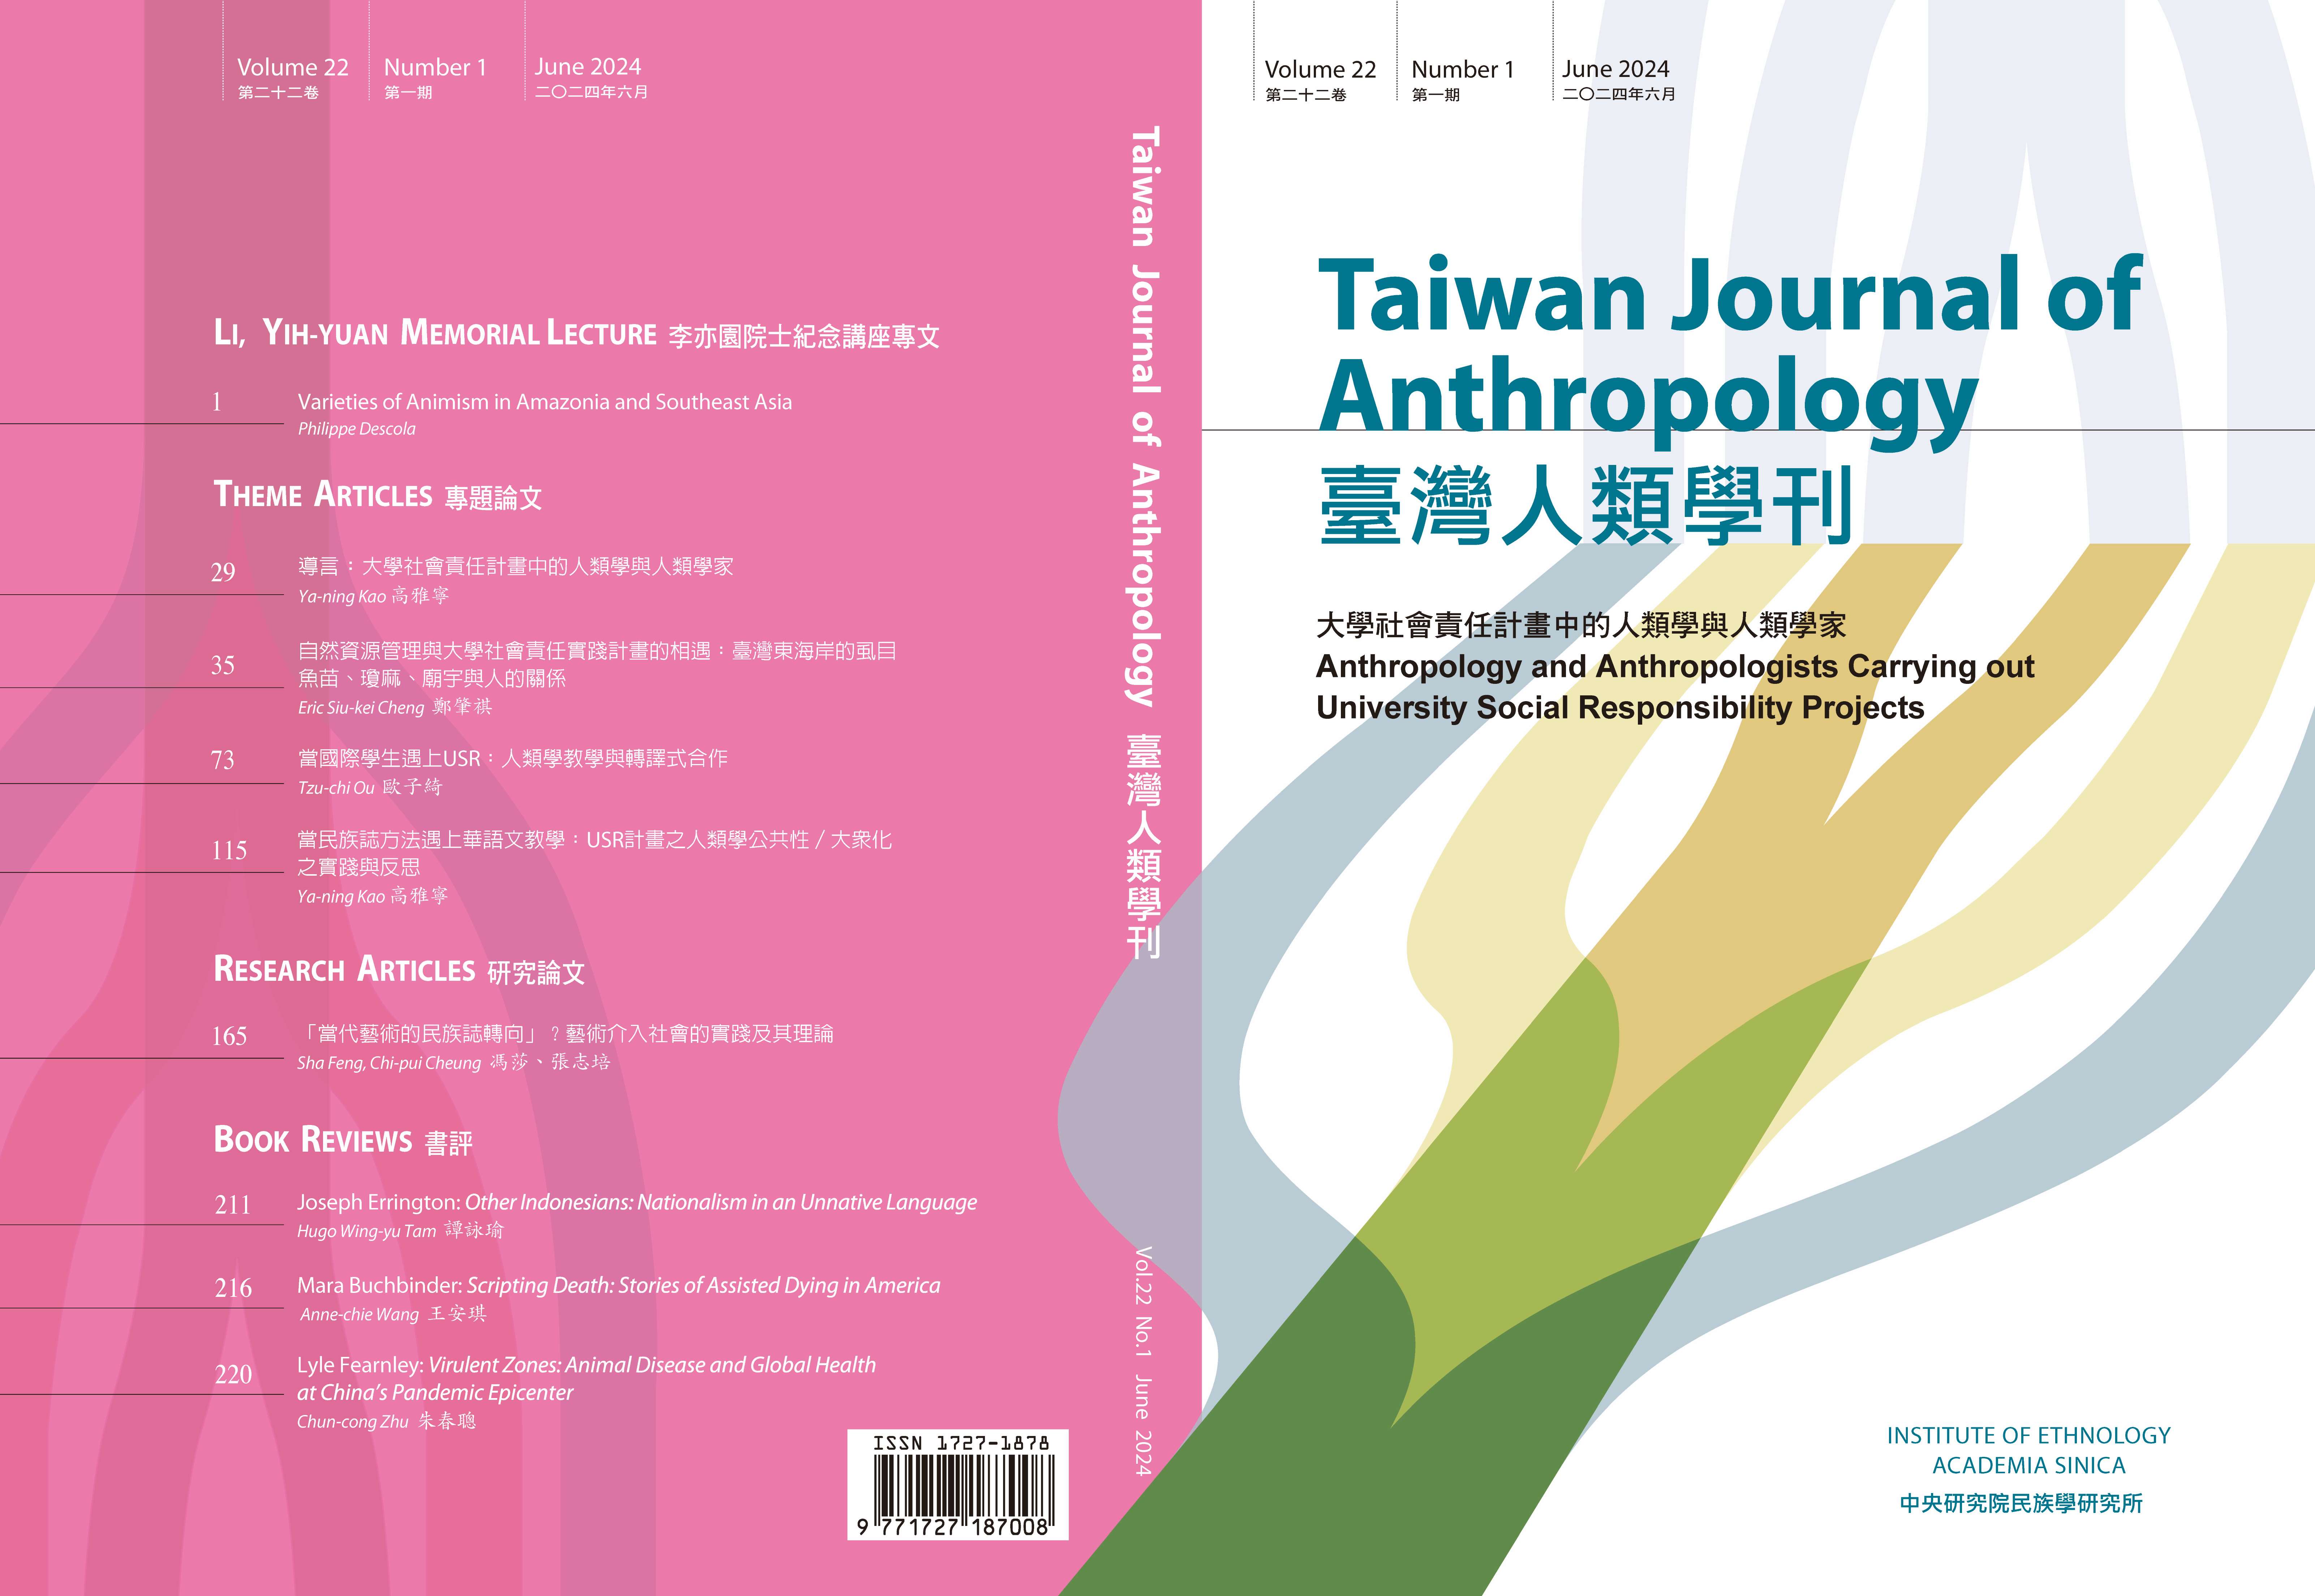 Taiwan Journal of Anthropology, Academia Sinica, Volume 22 No.1 has been published